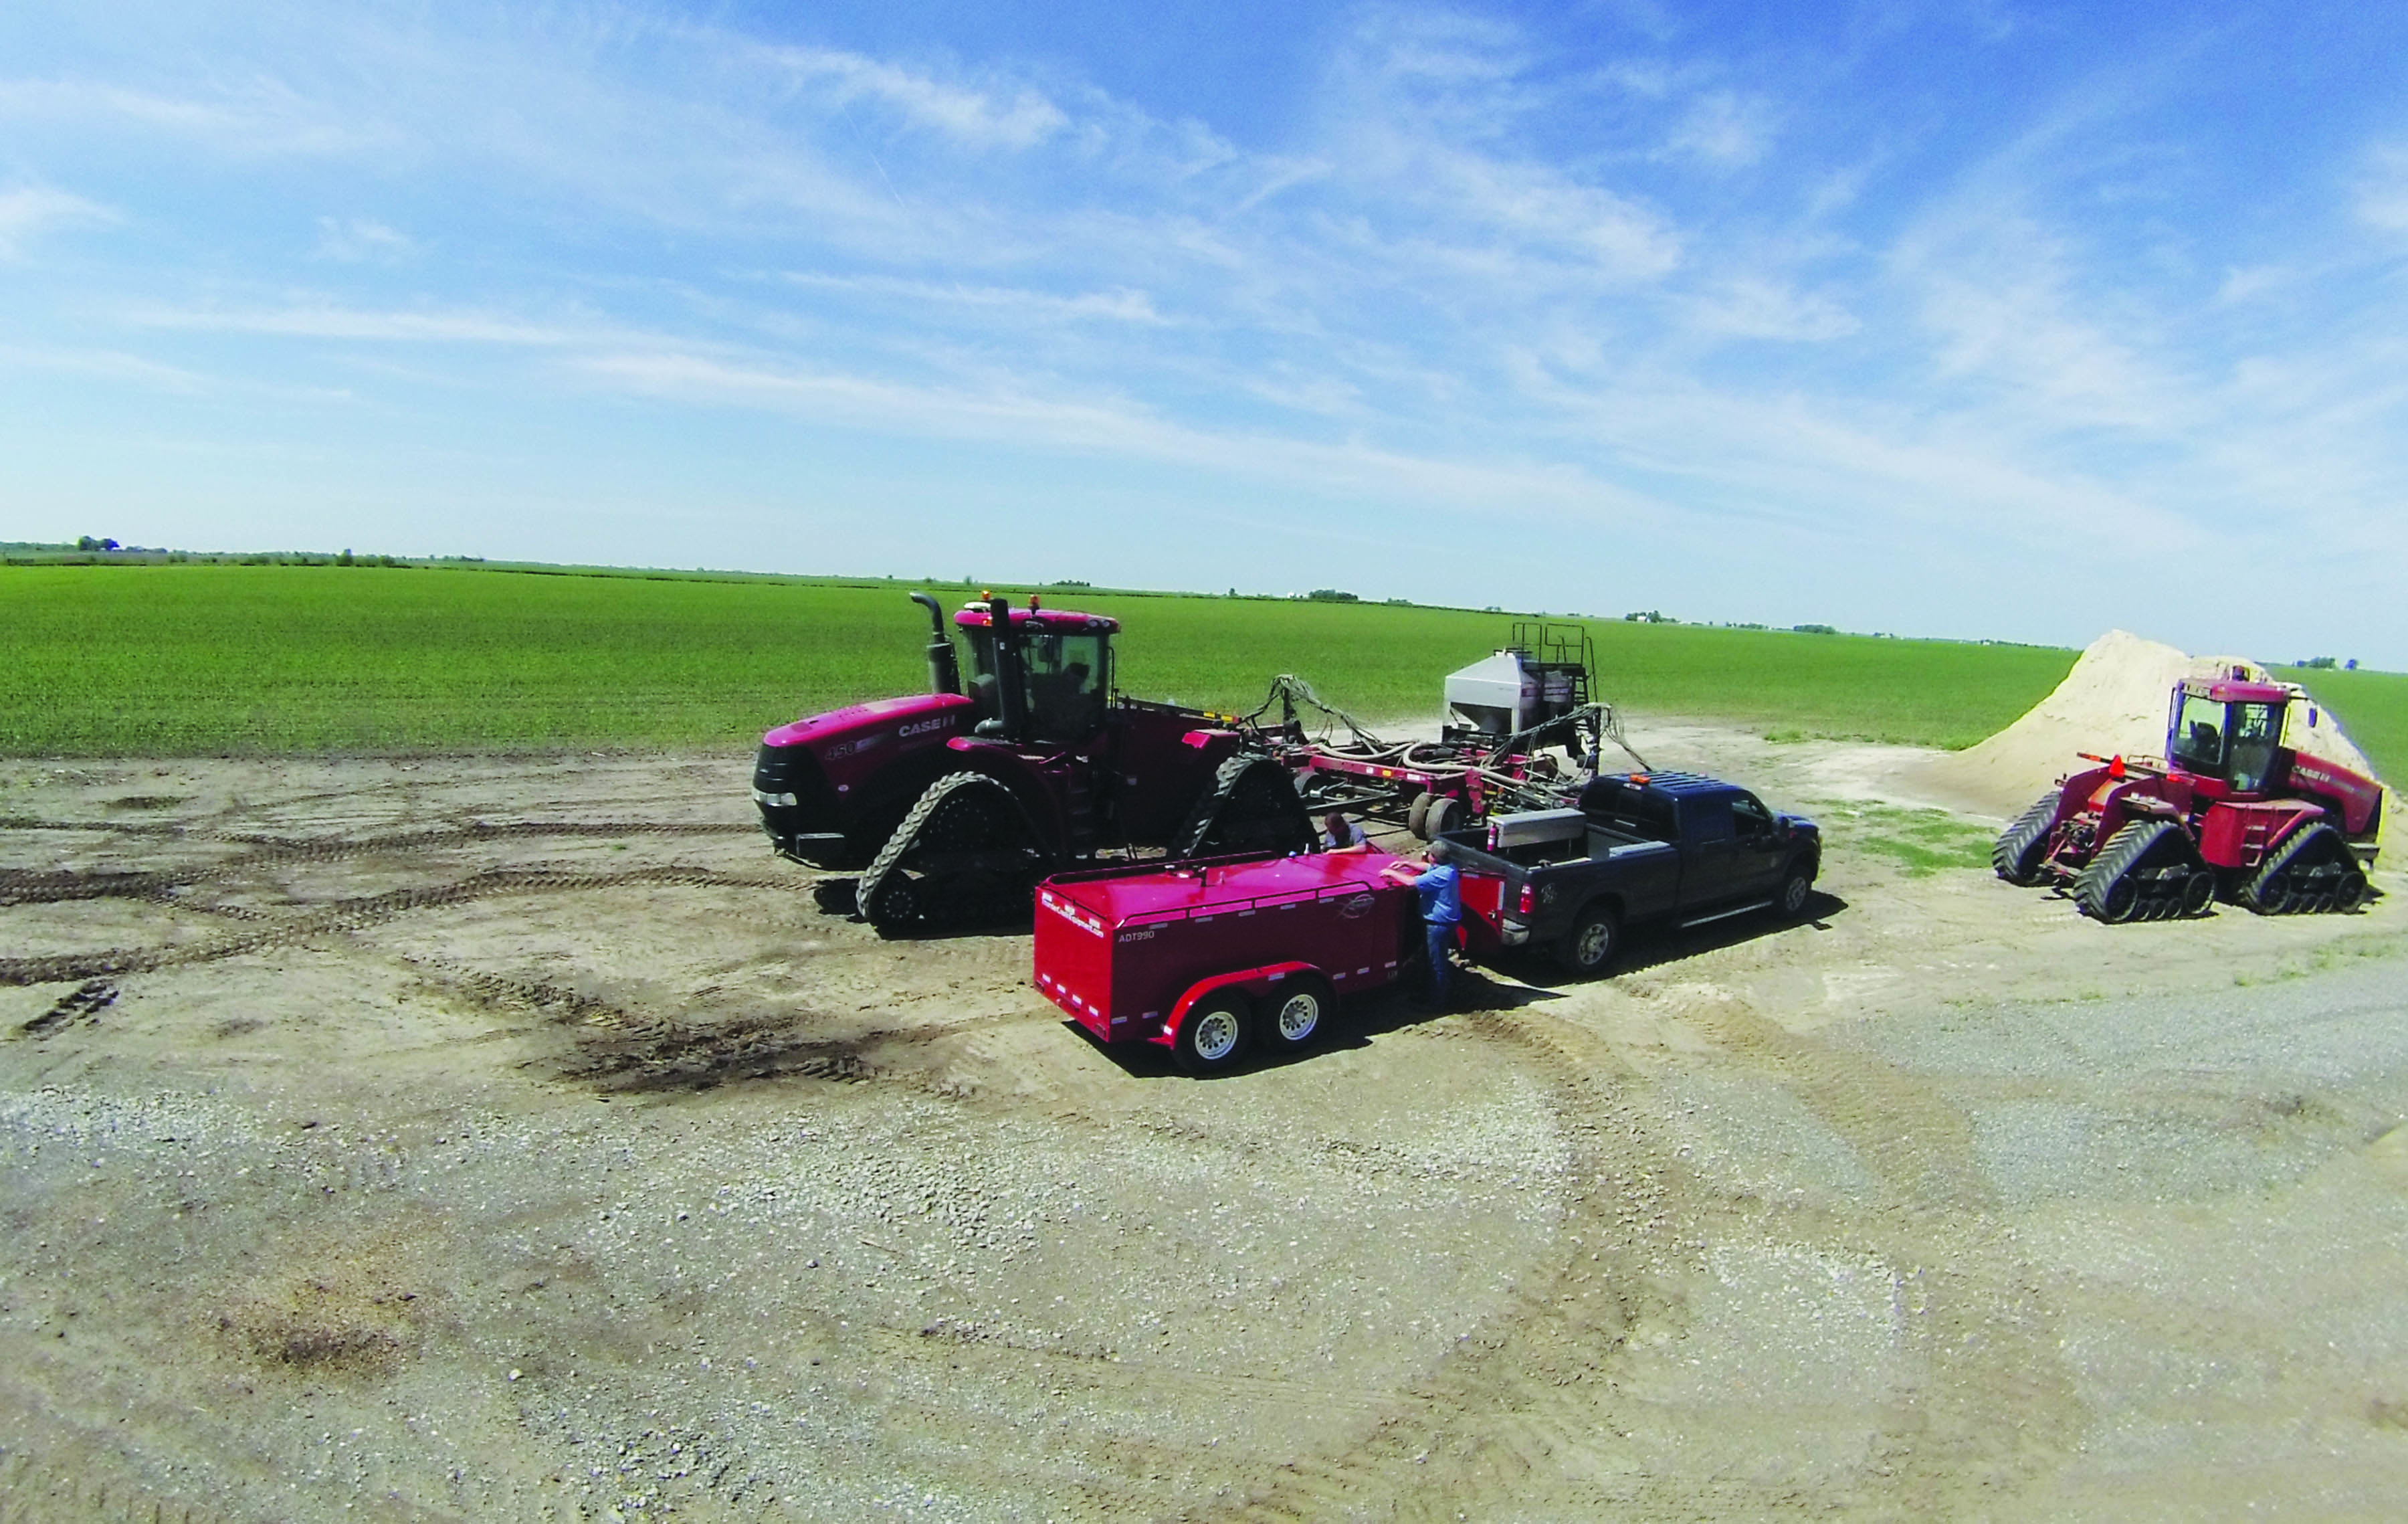 Join the thousands of farmers who rely on Thunder Creek to make the most of their field time. With solutions for fuel, diesel exhaust fluid, tools and parts, you can be ready with the only solution you need to maintain your machinery in minutes.